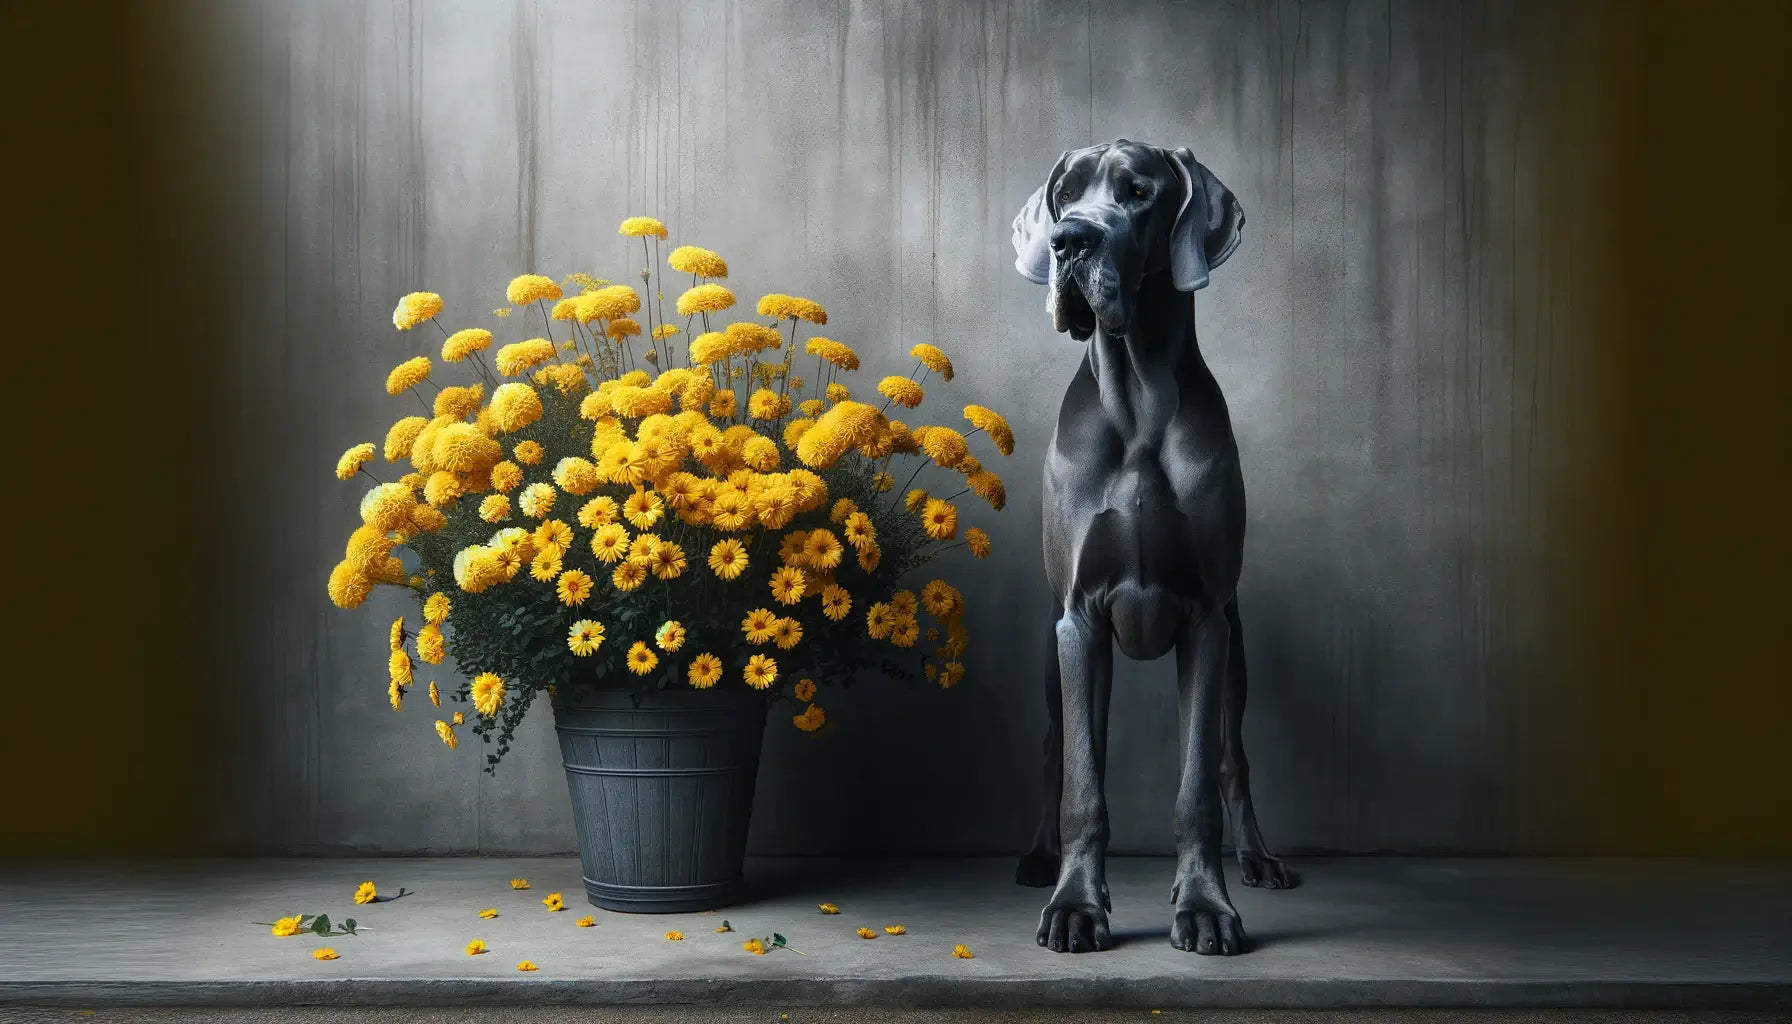 Blue Great Dane next to a pot of yellow flowers, its striking blue coat standing out against grey concrete and vibrant blooms.